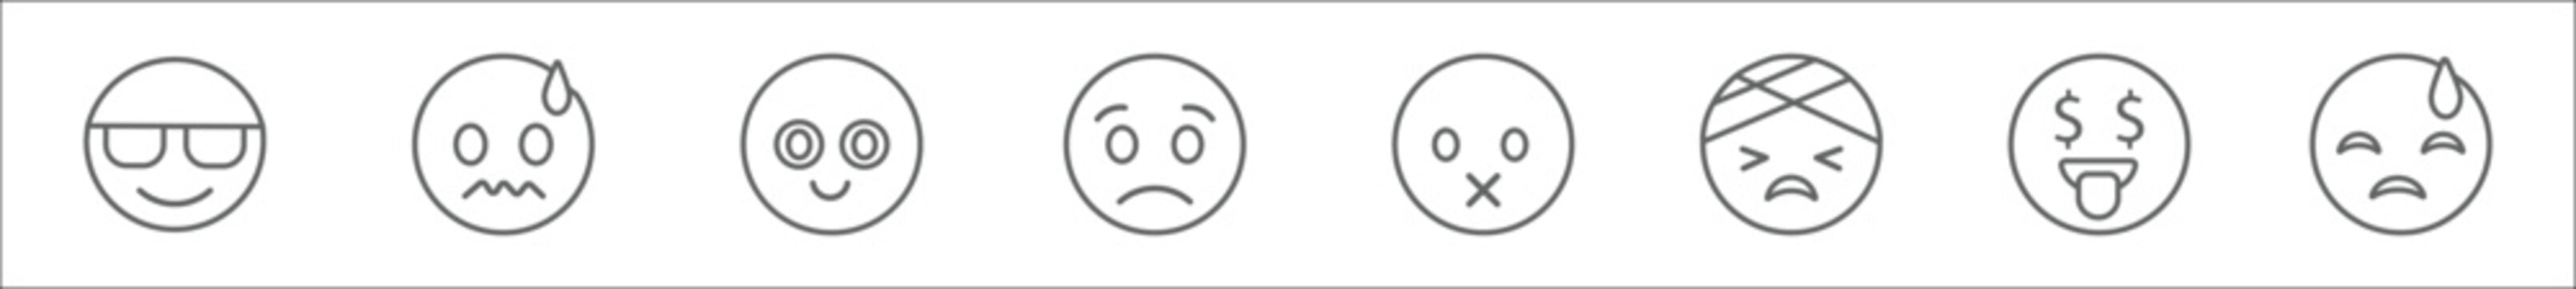 outline set of emoji line icons. linear vector icons such as cool emoji, nervous emoji, nerd sad muted with head-bandage rich downcast with sweat